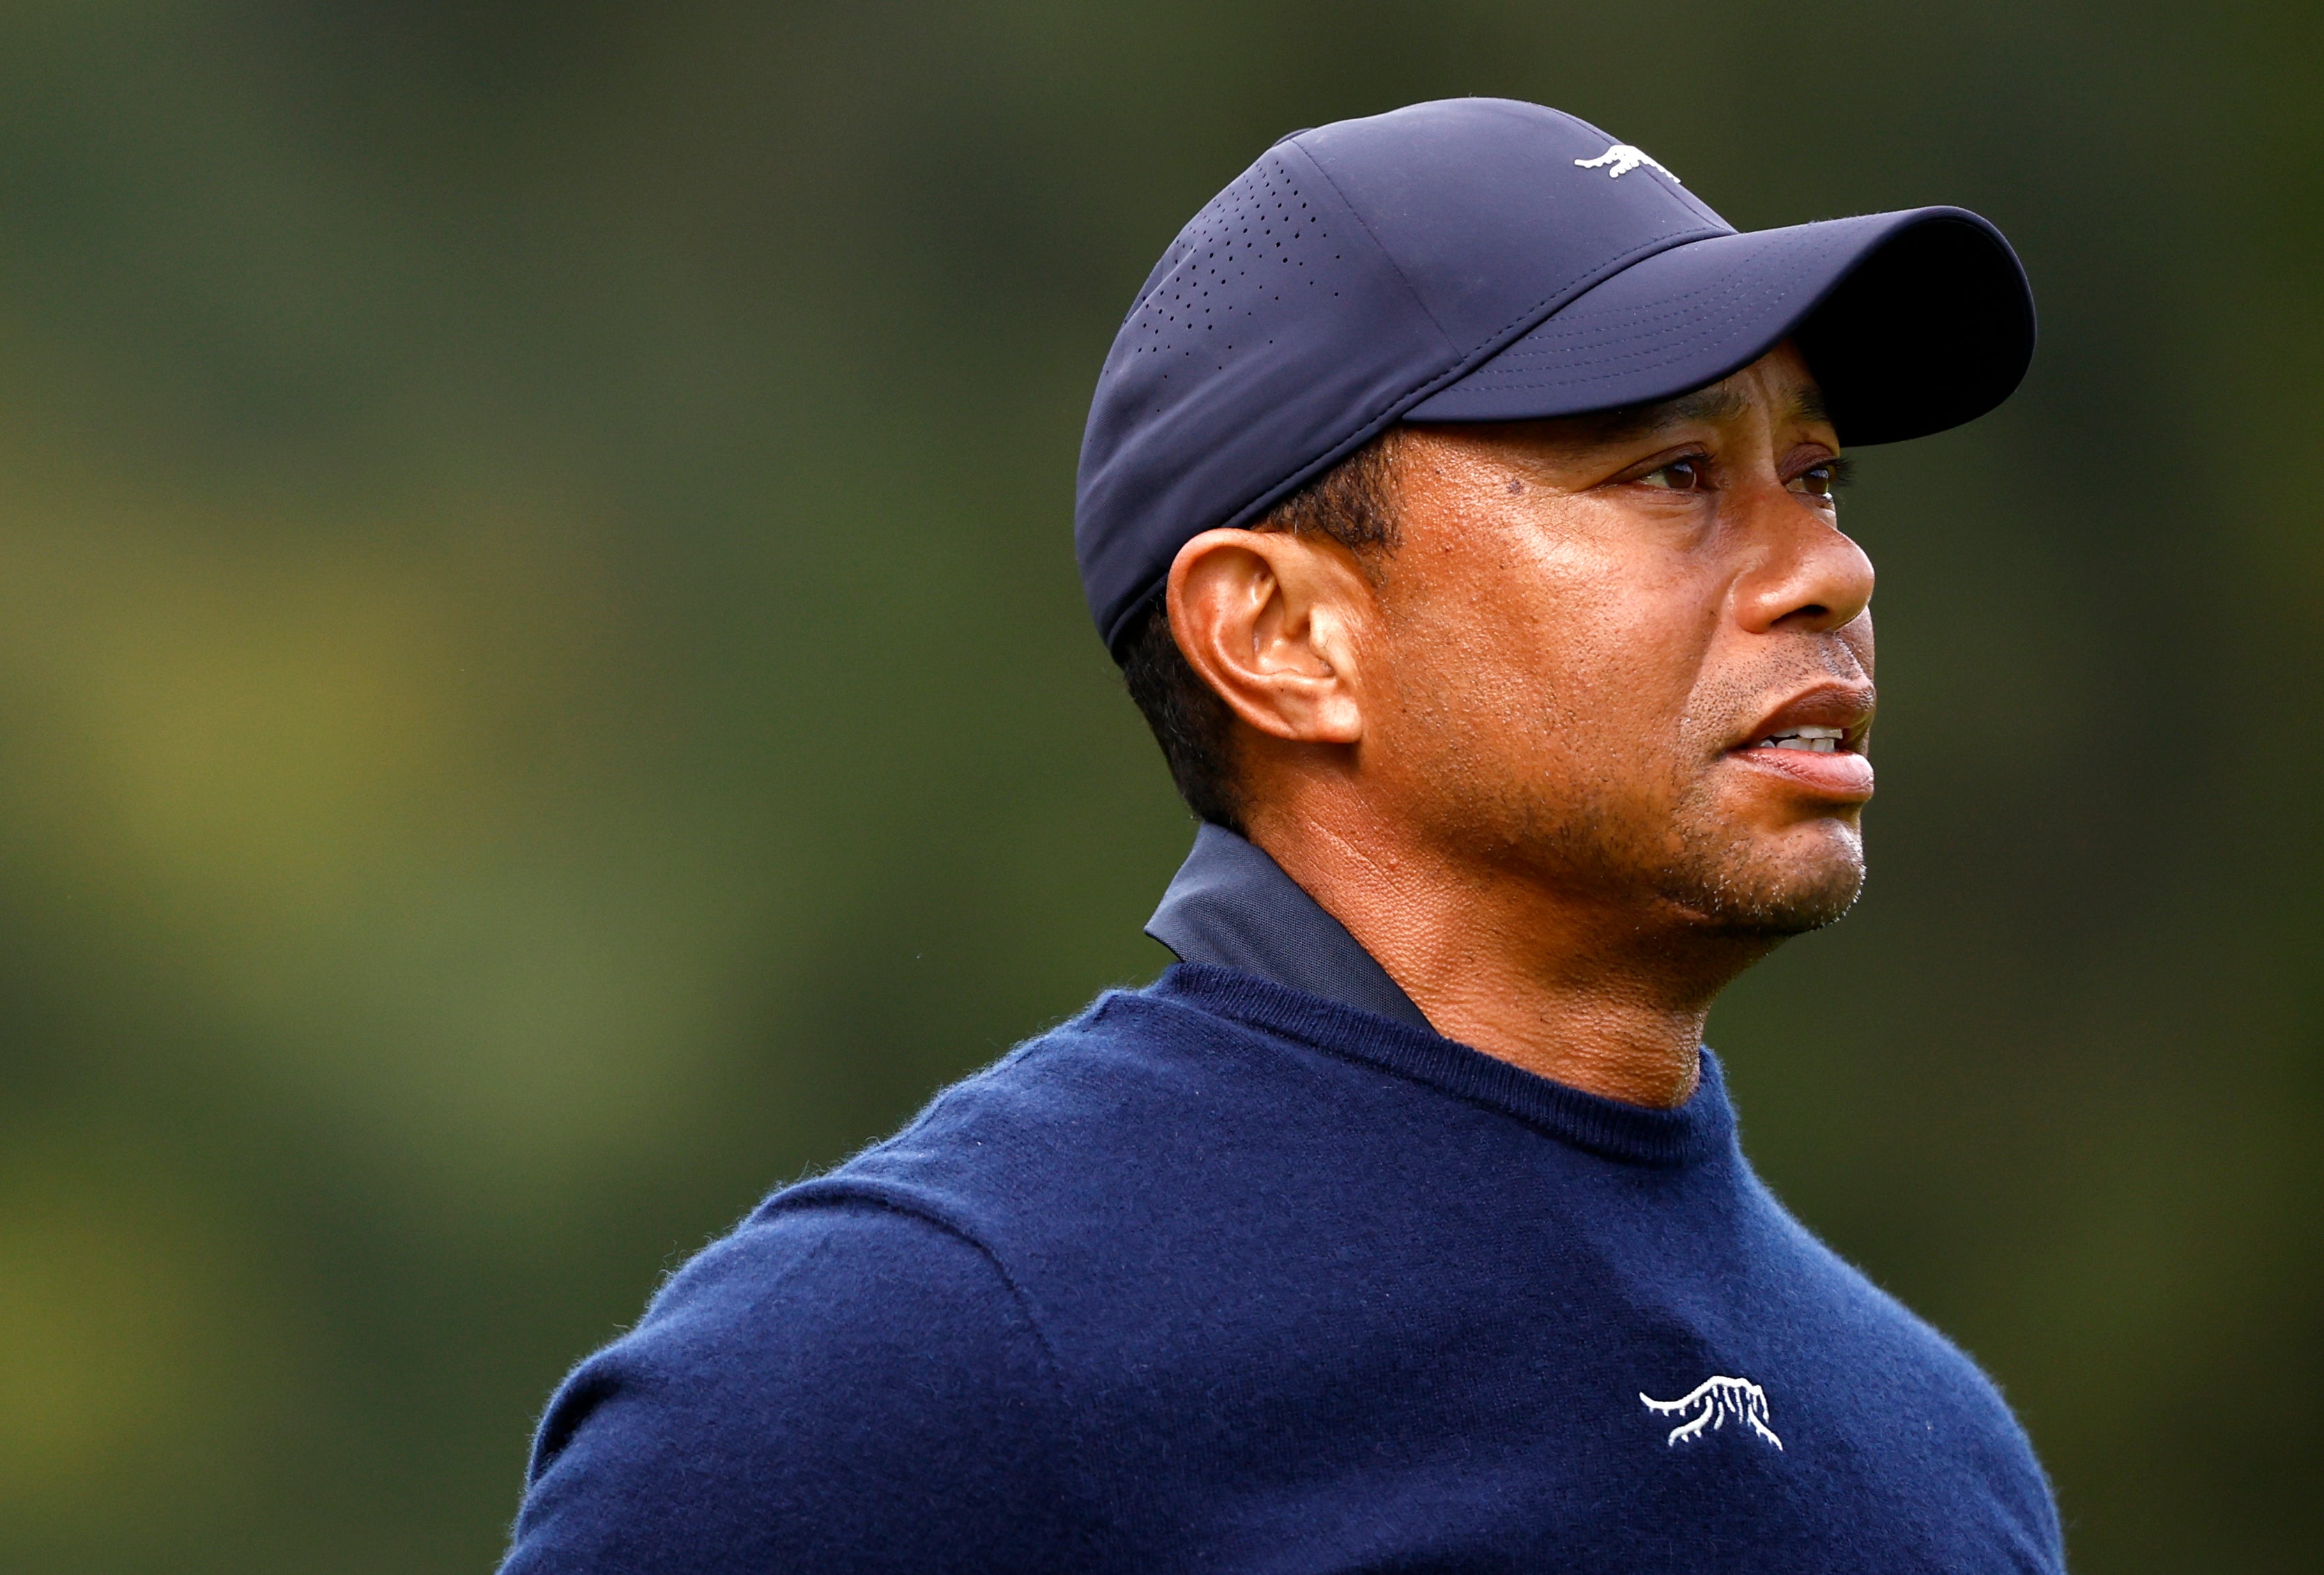 Tiger Woods has joined a meeting to try and finalise a partnership between golf’s warring factions